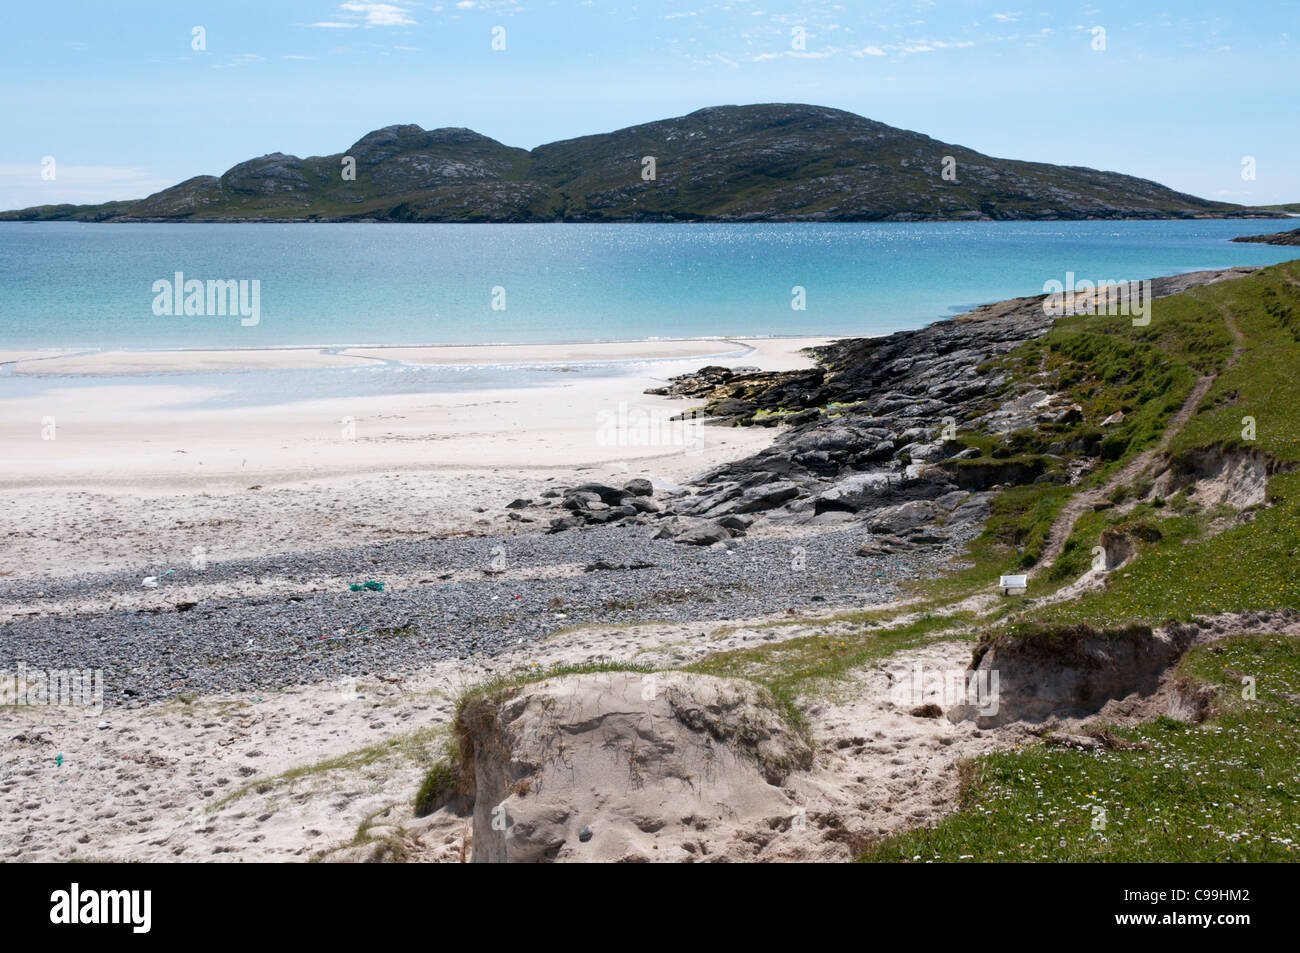 The island of Sandray seen across Sandray Sound from the south of Vatersay in the Outer Hebrides. Stock Photo